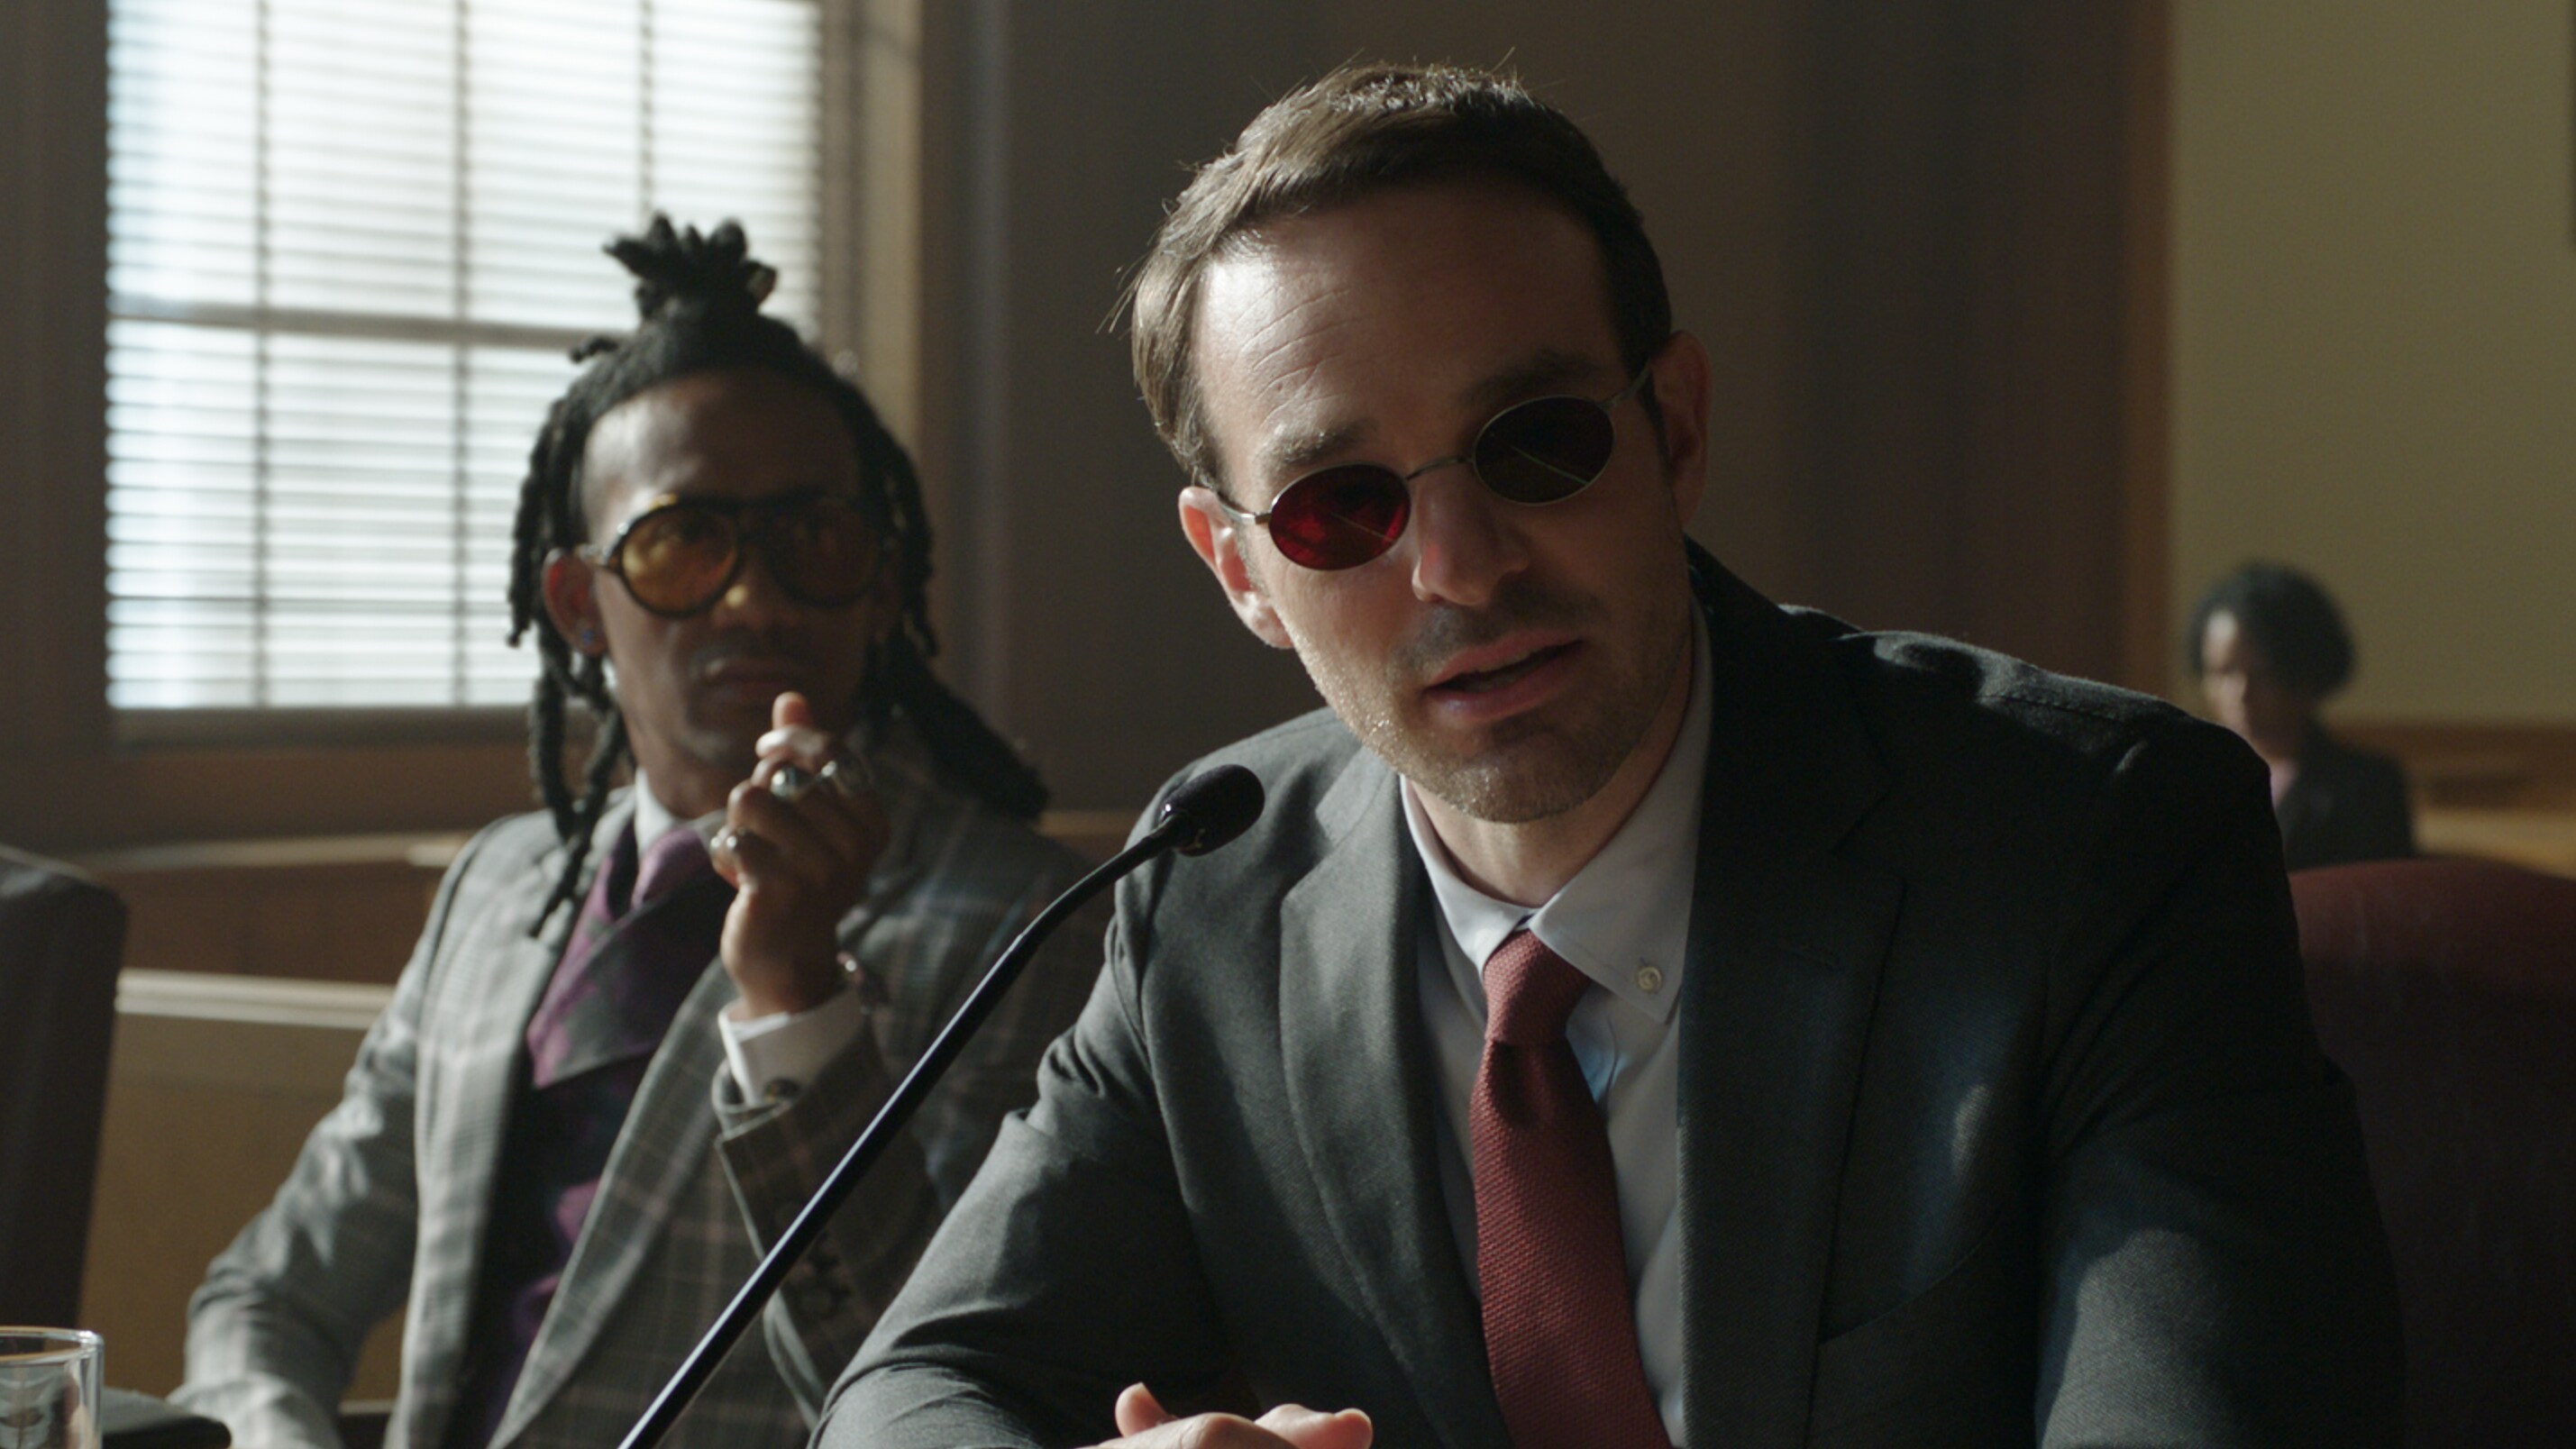 (L-R): Griffin Matthews as Luke Jacobson and Charlie Cox as Daredevil/Matt Murdock in Marvel Studios' She-Hulk: Attorney at Law, exclusively on Disney+. Photo courtesy of Marvel Studios. © 2022 MARVEL.